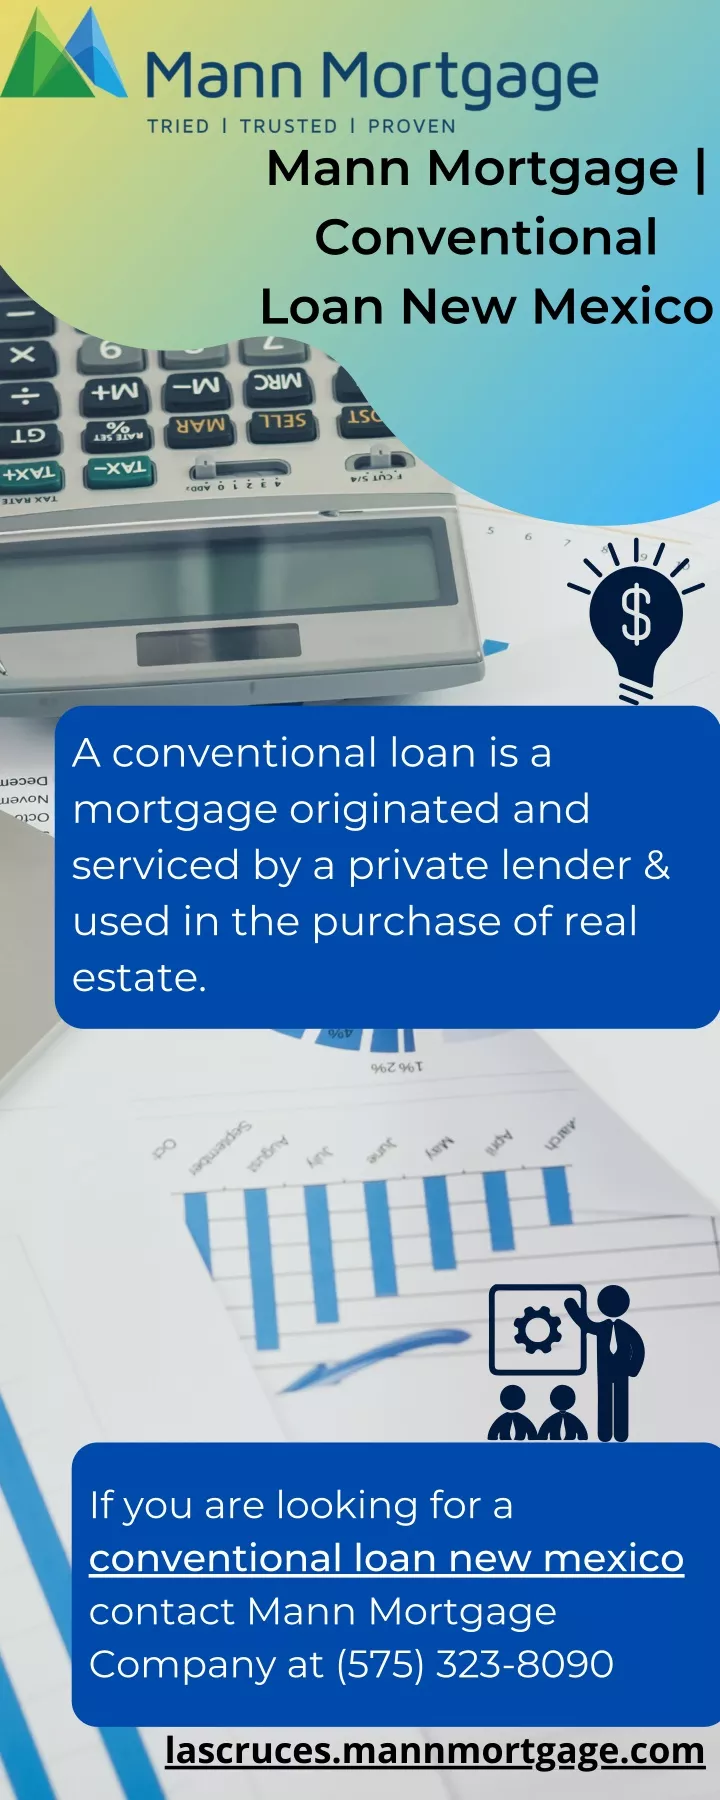 mann mortgage conventional loan new mexico